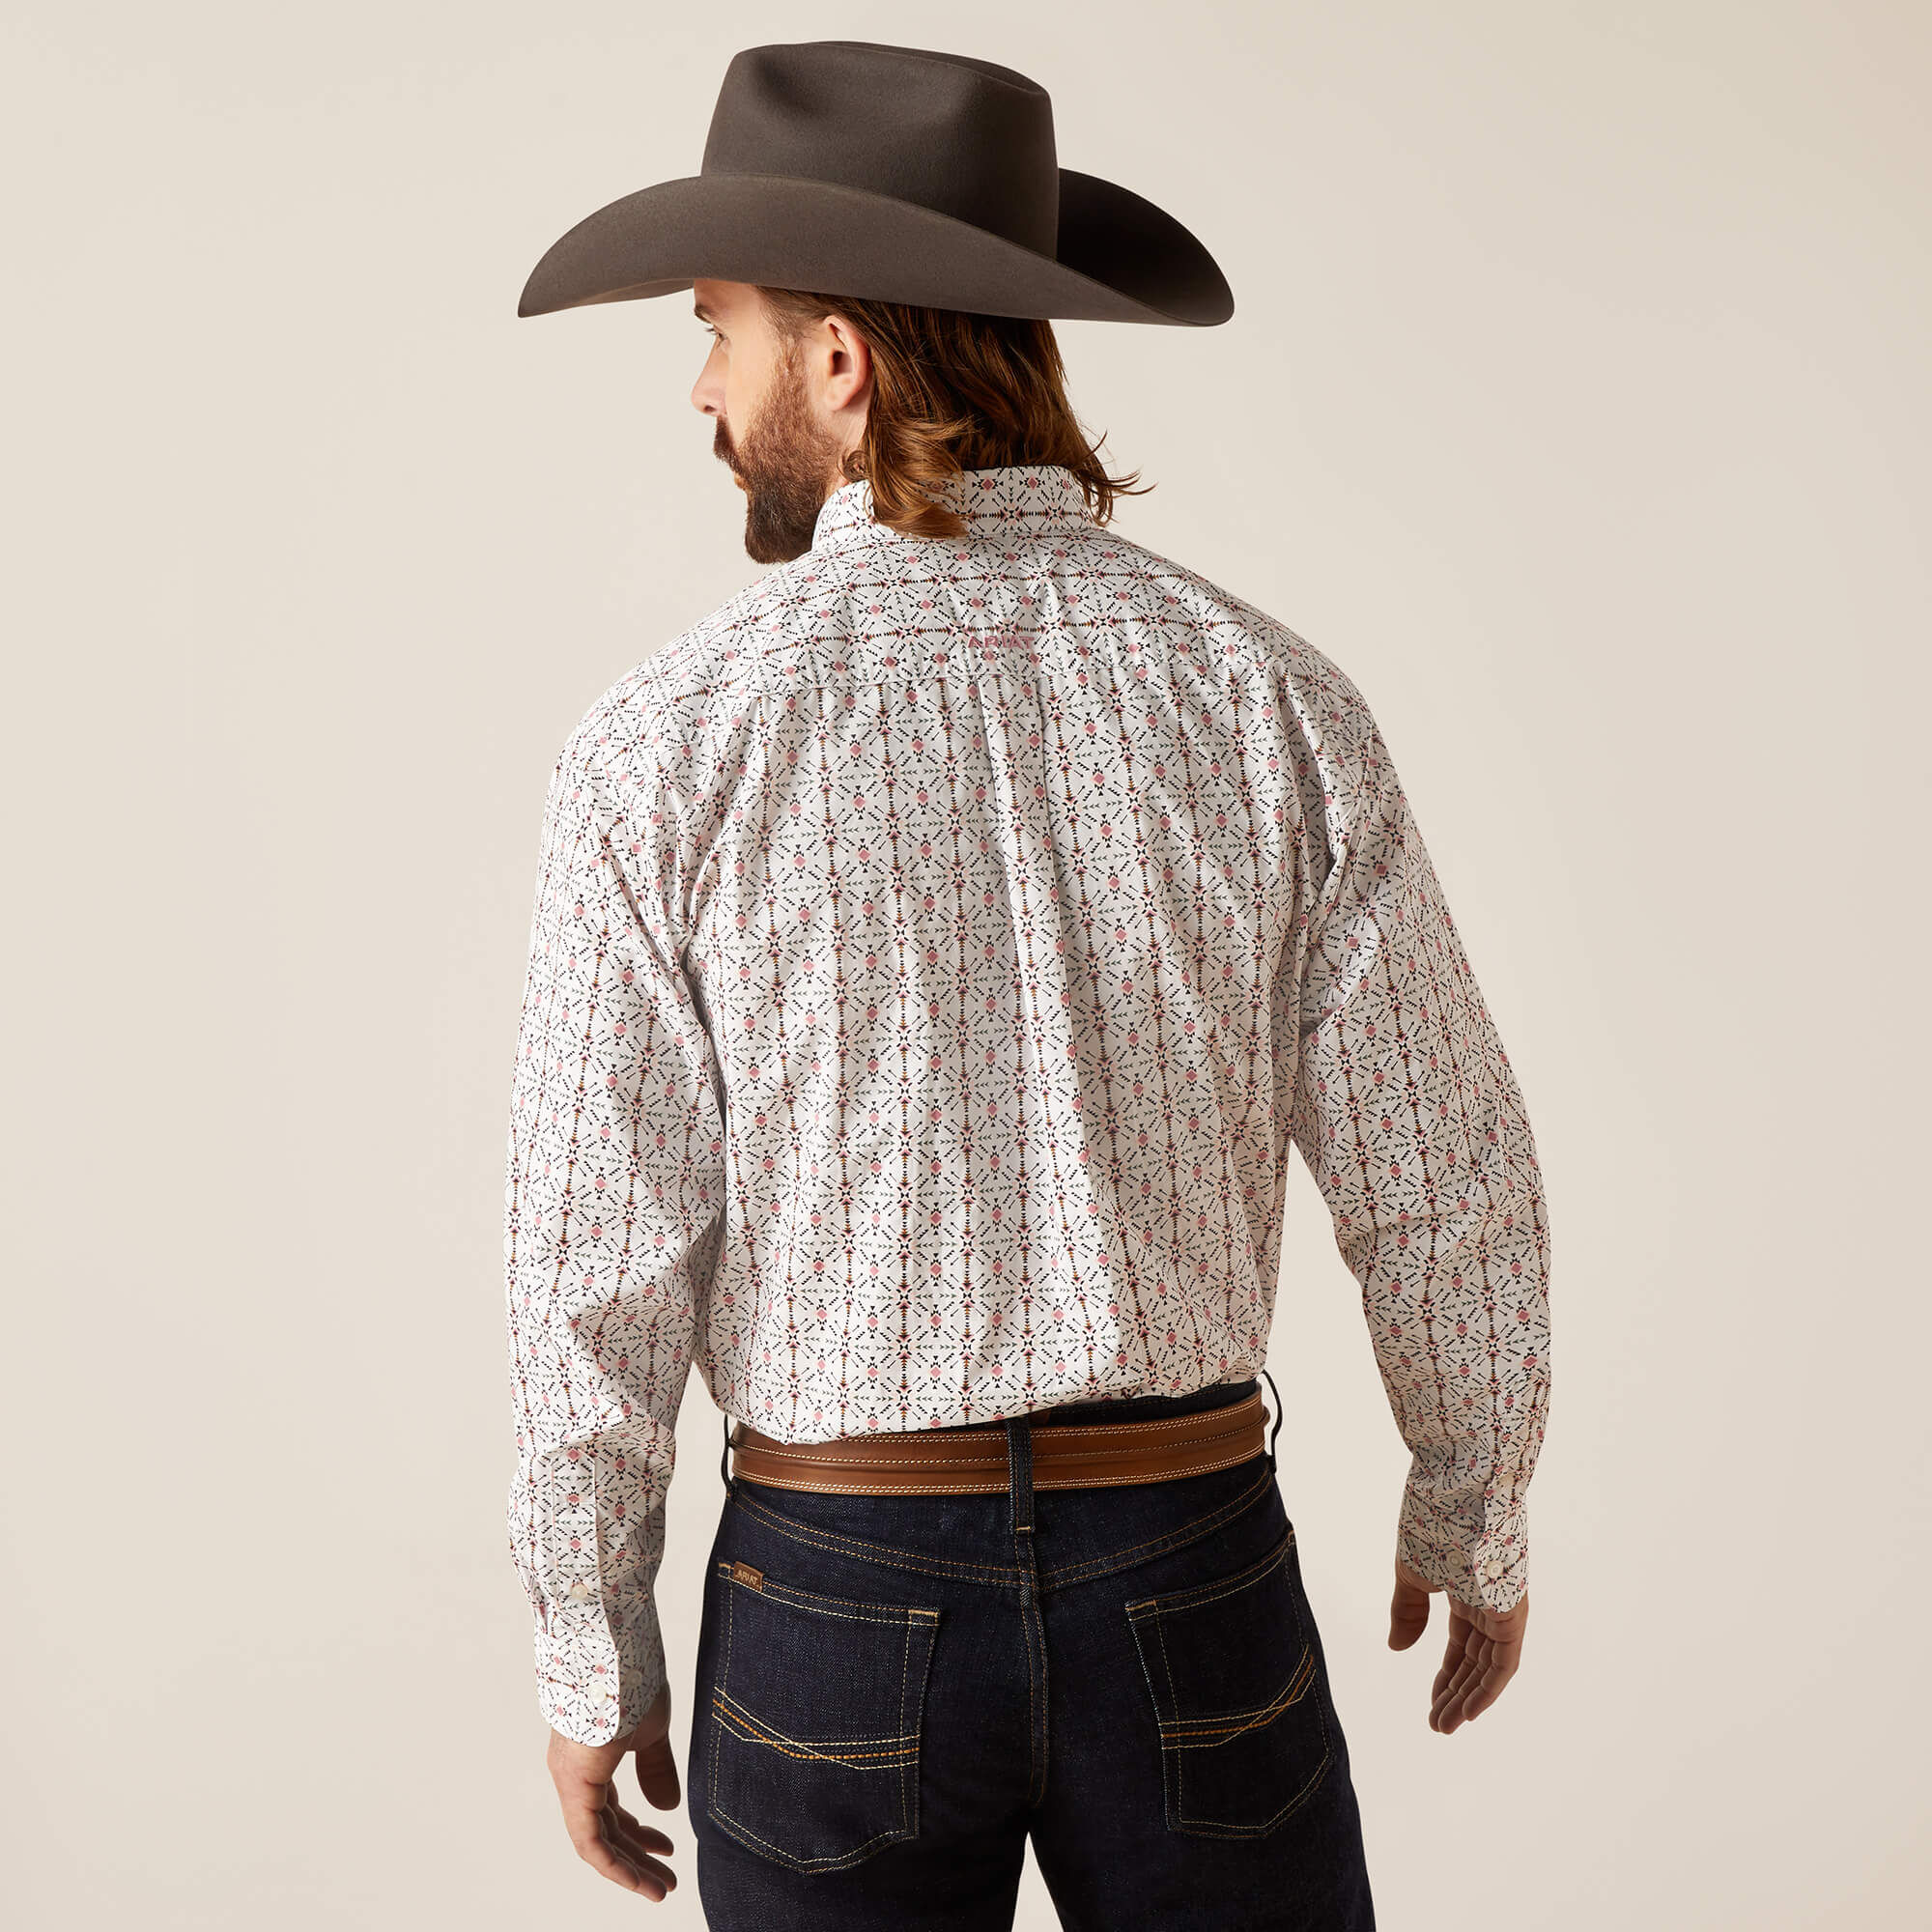 Men's Edgar Classic Fit Shirt in White, Size: Large_Tall by Ariat